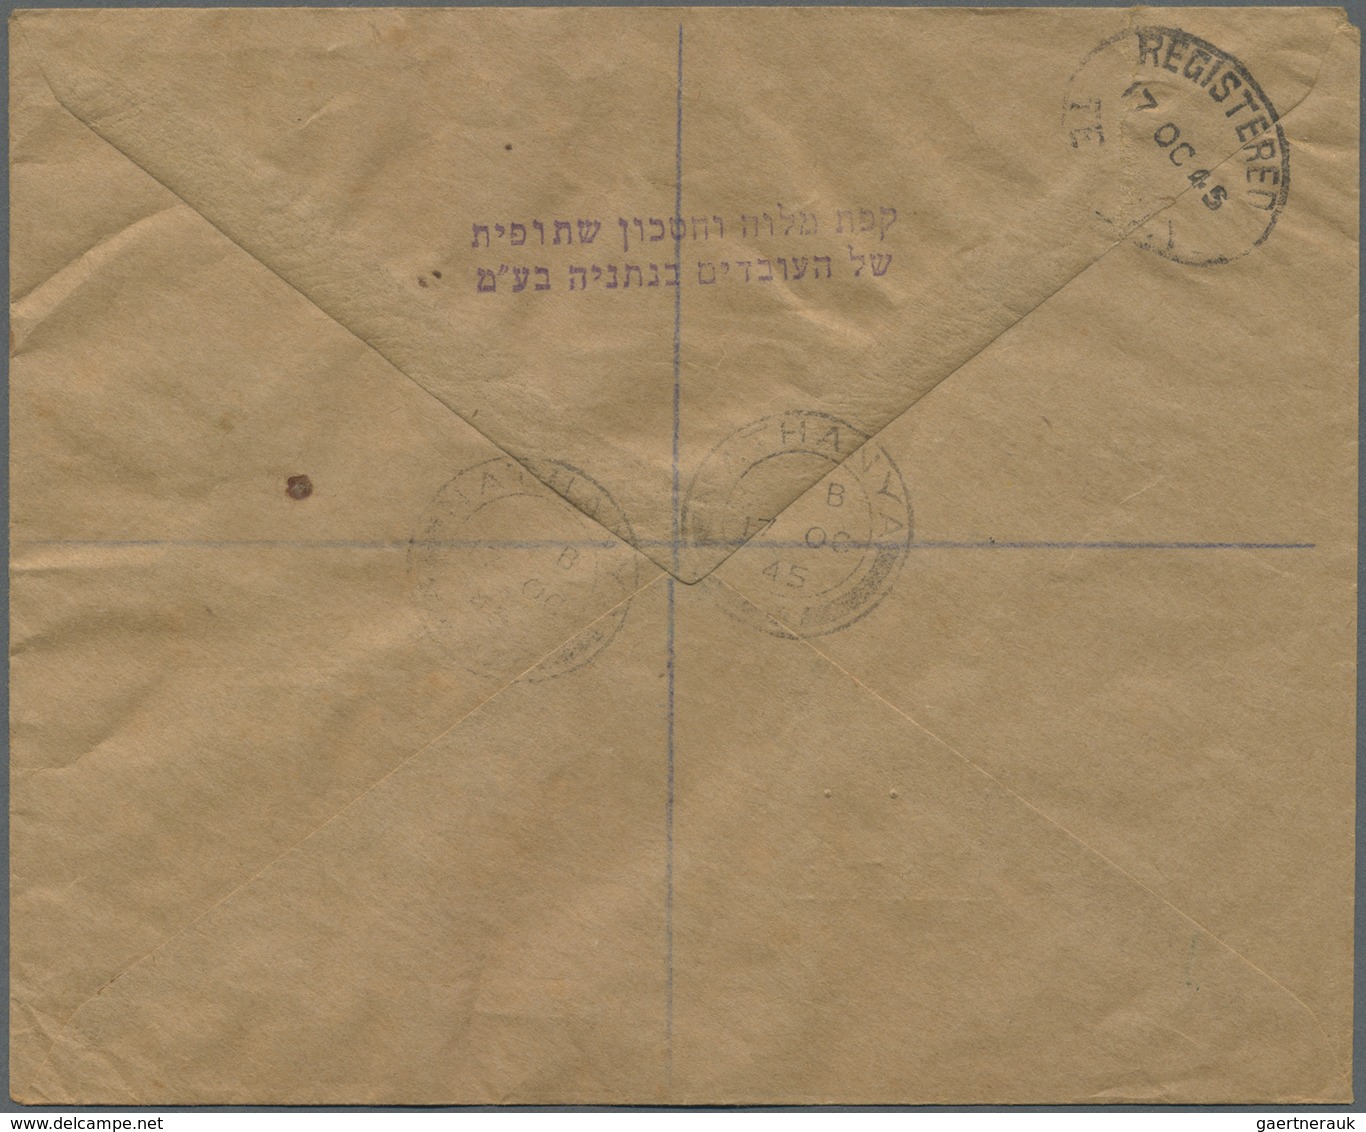 Br/GA Palästina: 1943/47, three covers used registered from Hadera with stationery cut-outs, also IRC repl